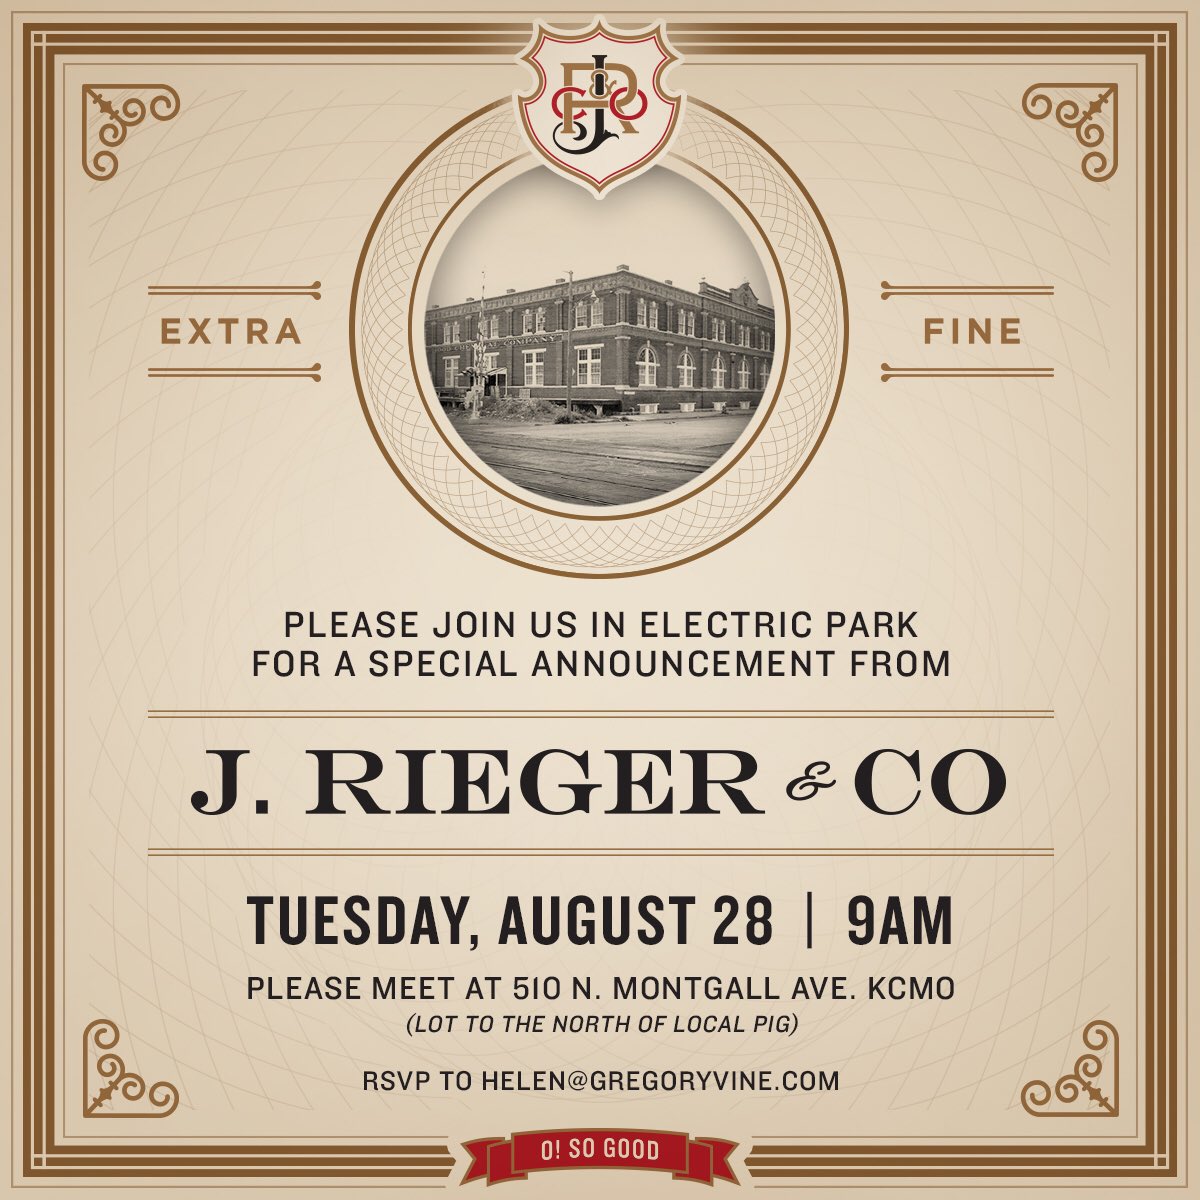 Honored to join @JRiegerCo announcing plans to open their New Distillery and Hospitality Center. New facility will expand production to meet increased distribution demand in 20 states. Opening late spring 2019, hospitality center will host up to 100,000 guests annually. #KCRising